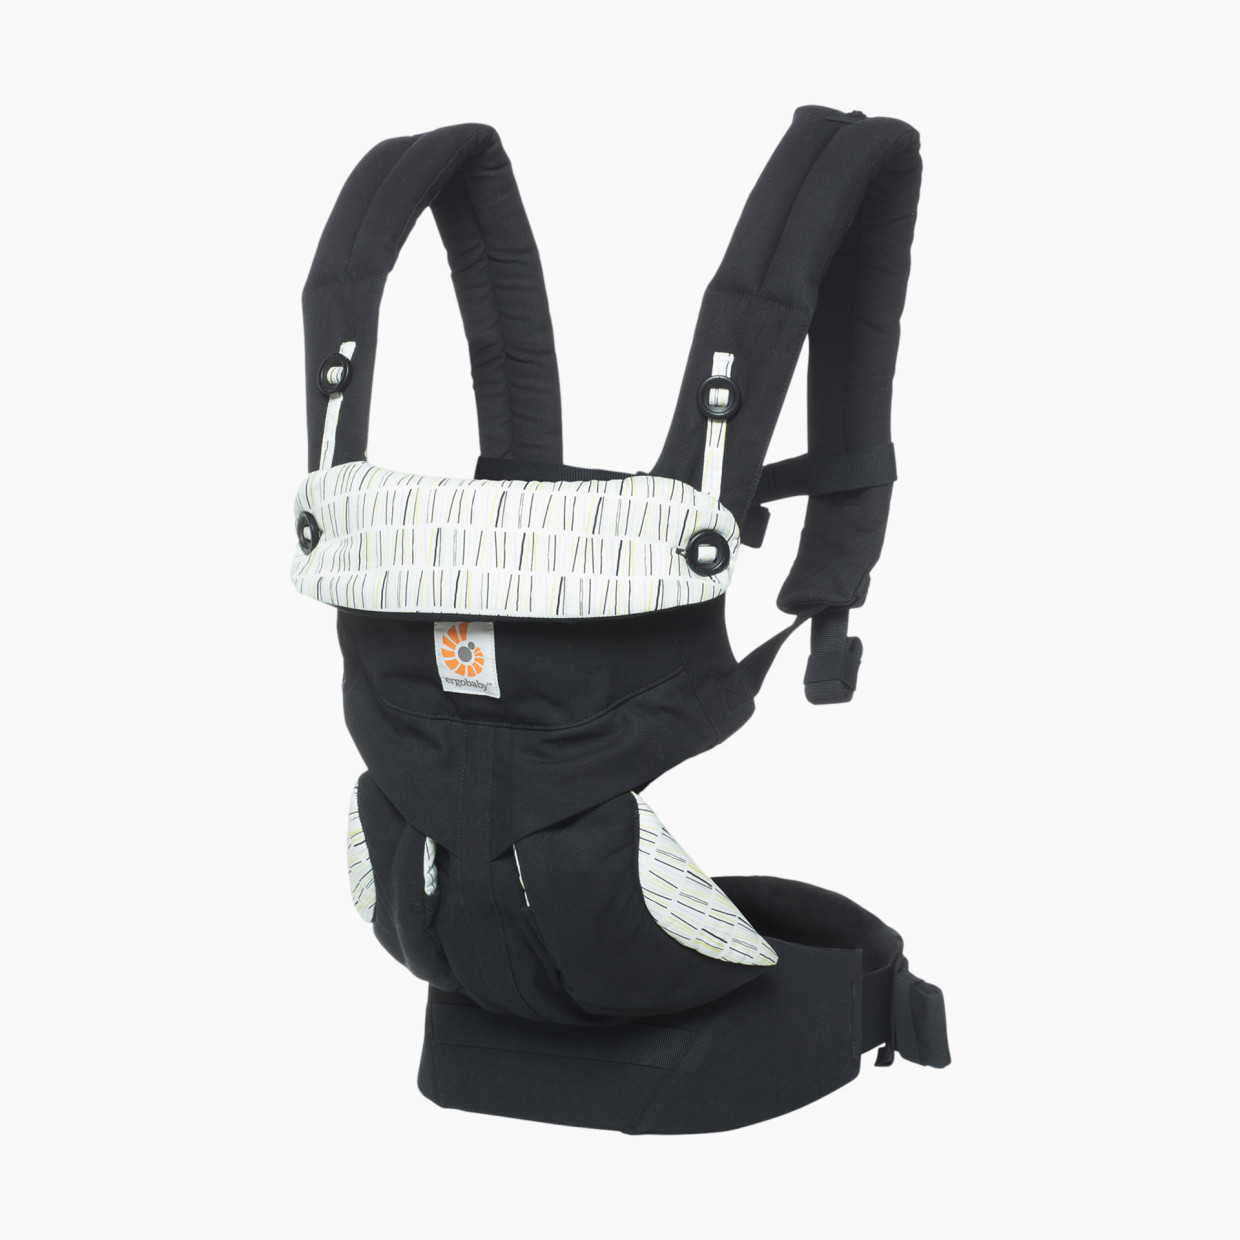 Ergobaby 360 Baby Carrier - Downtown.